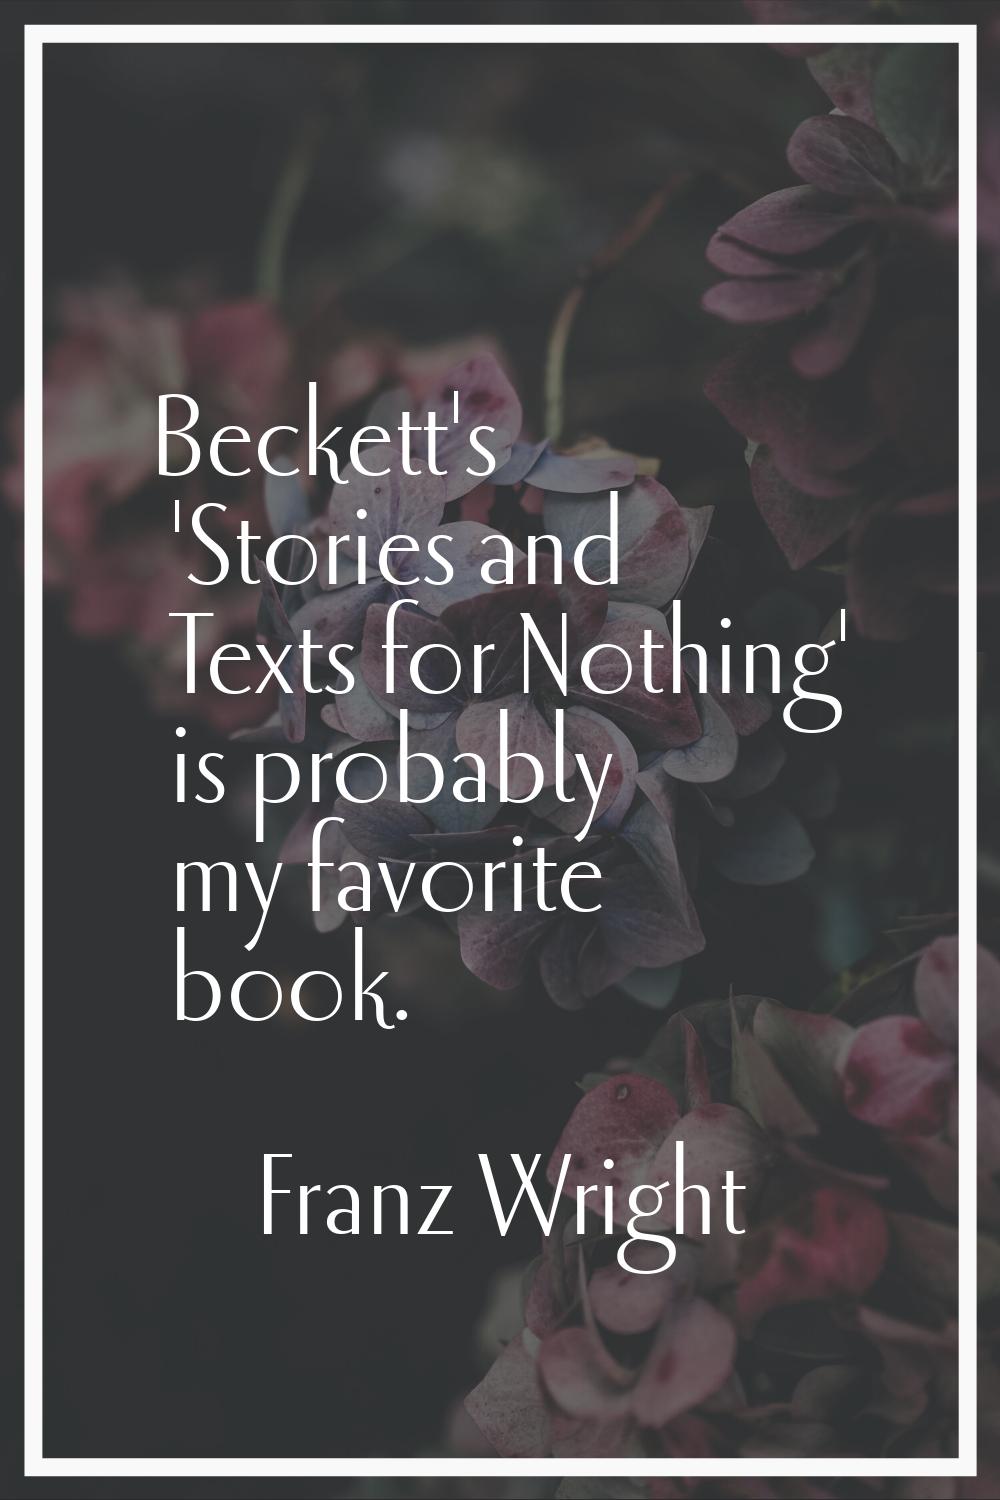 Beckett's 'Stories and Texts for Nothing' is probably my favorite book.